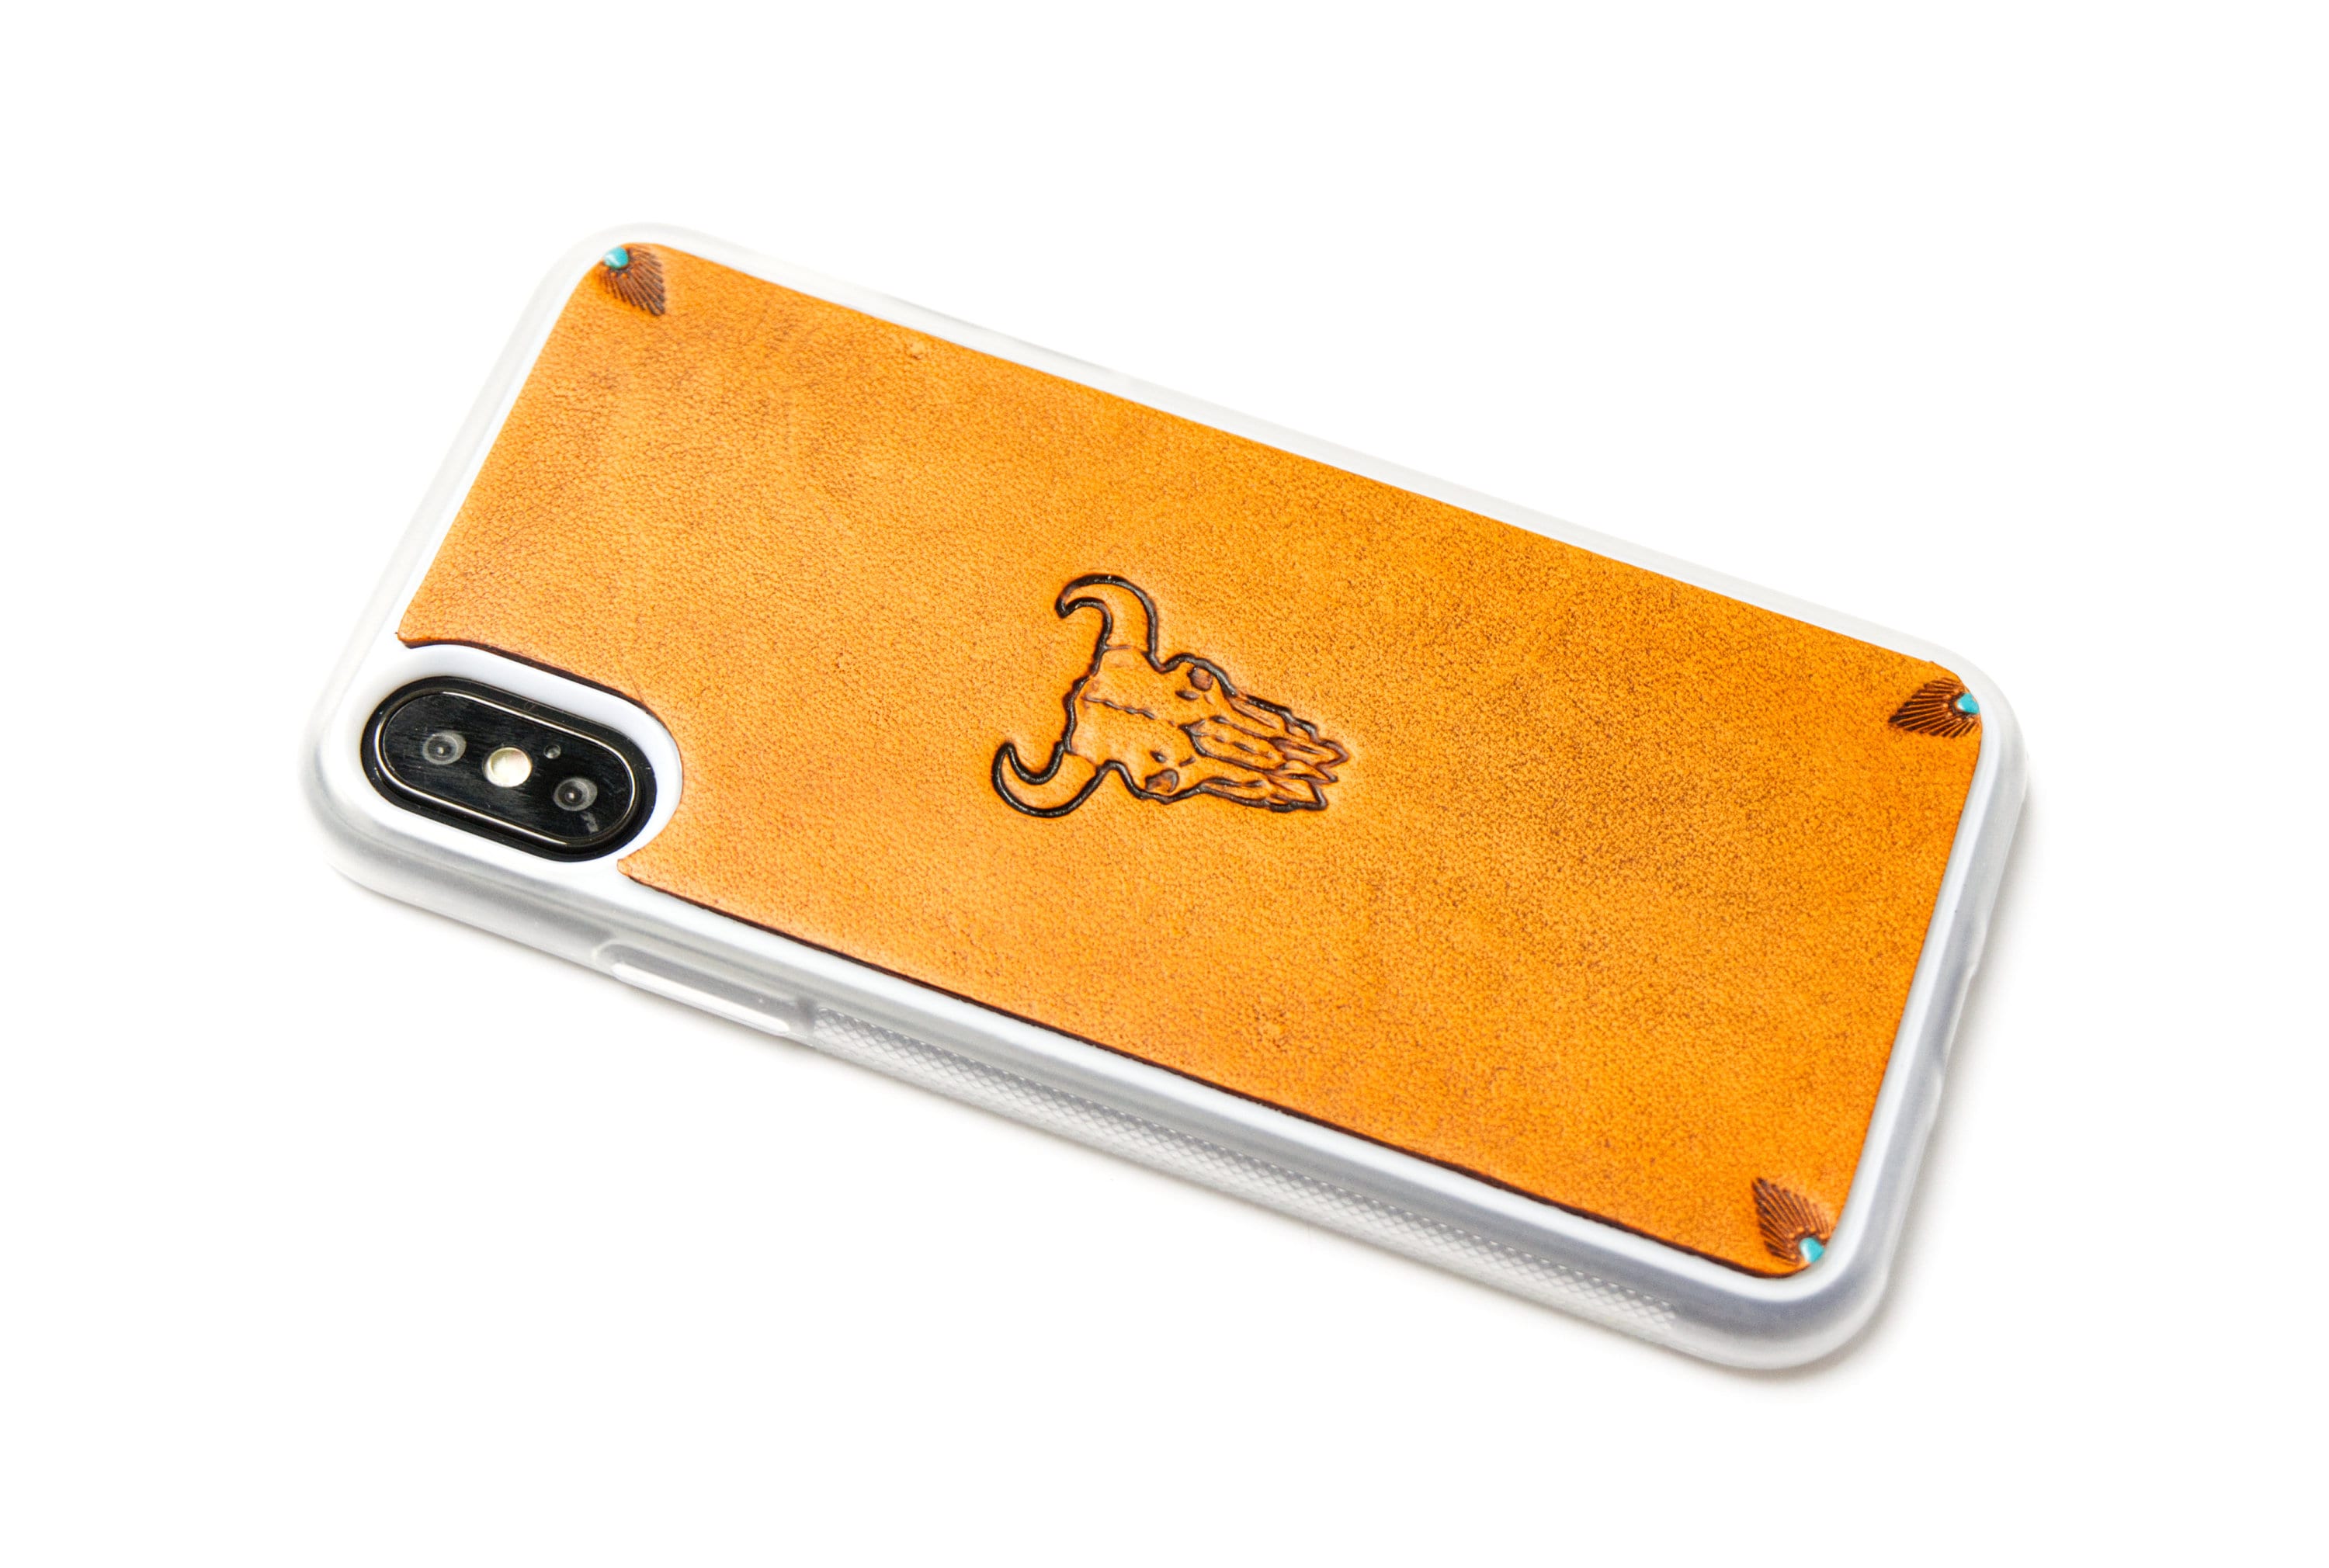 Louis Vuitton Cover Case For Samsung Galaxy S22 Ultra Plus S21 S20 S10 Note  -1